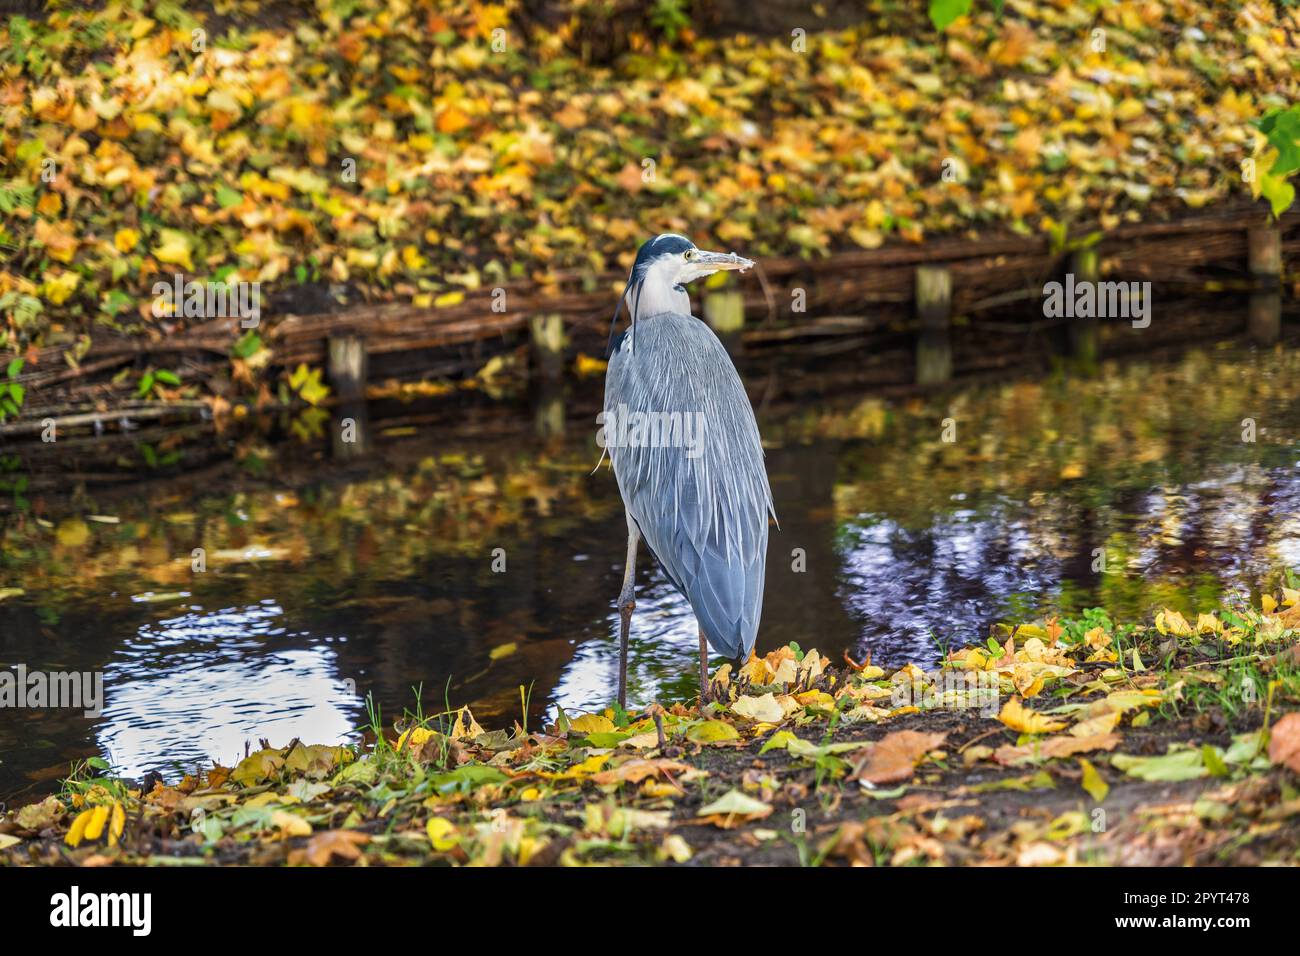 Grey heron (Ardea cinerea) at the canal in autumn park, wading bird in the family Ardeidae, region: temperate Europe and Asia. Stock Photo